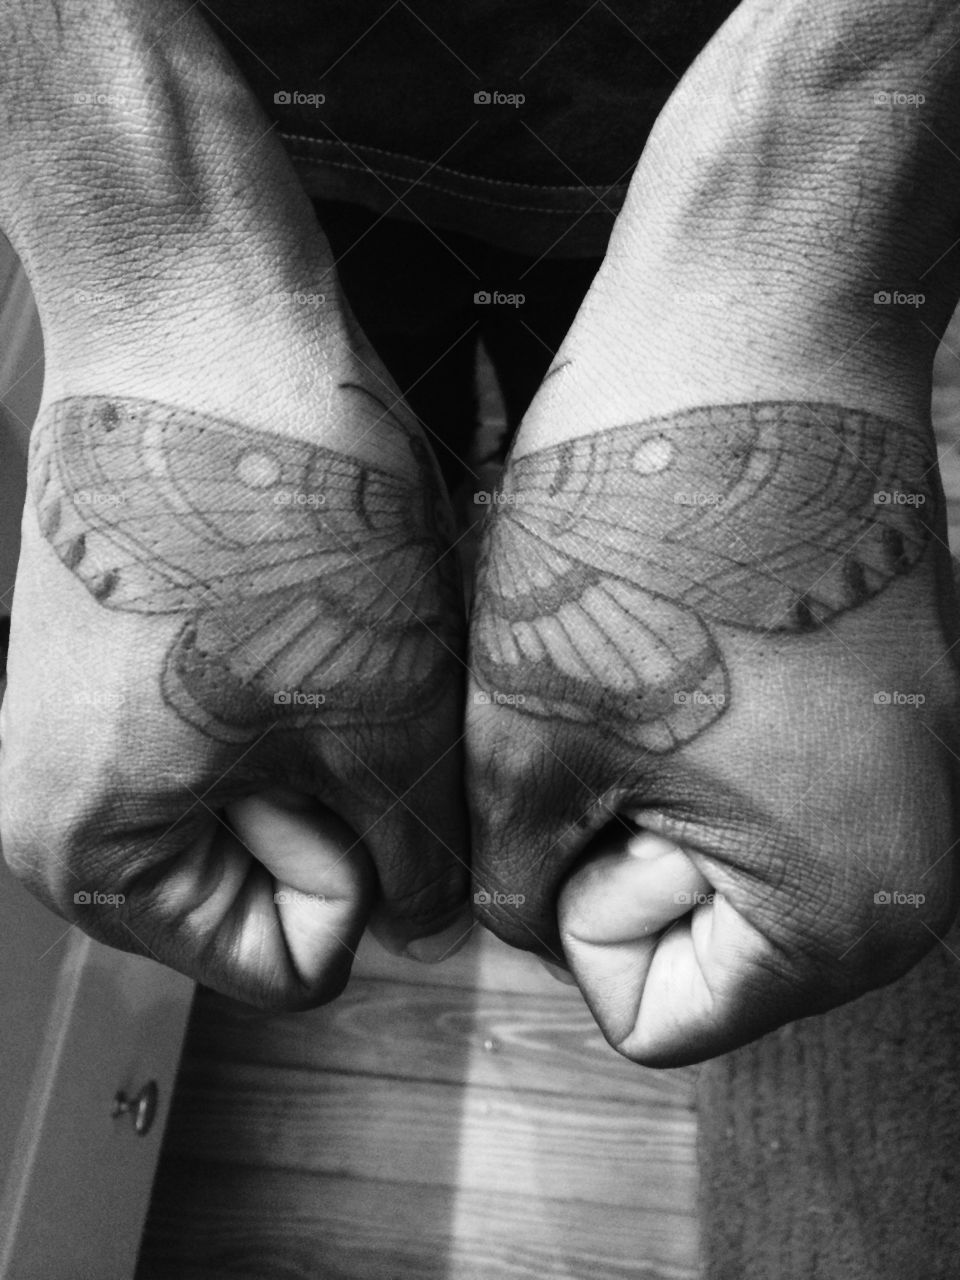 Mirror Tattoo on hands, death head moth, Tampa, by Chris at Red Letter One

